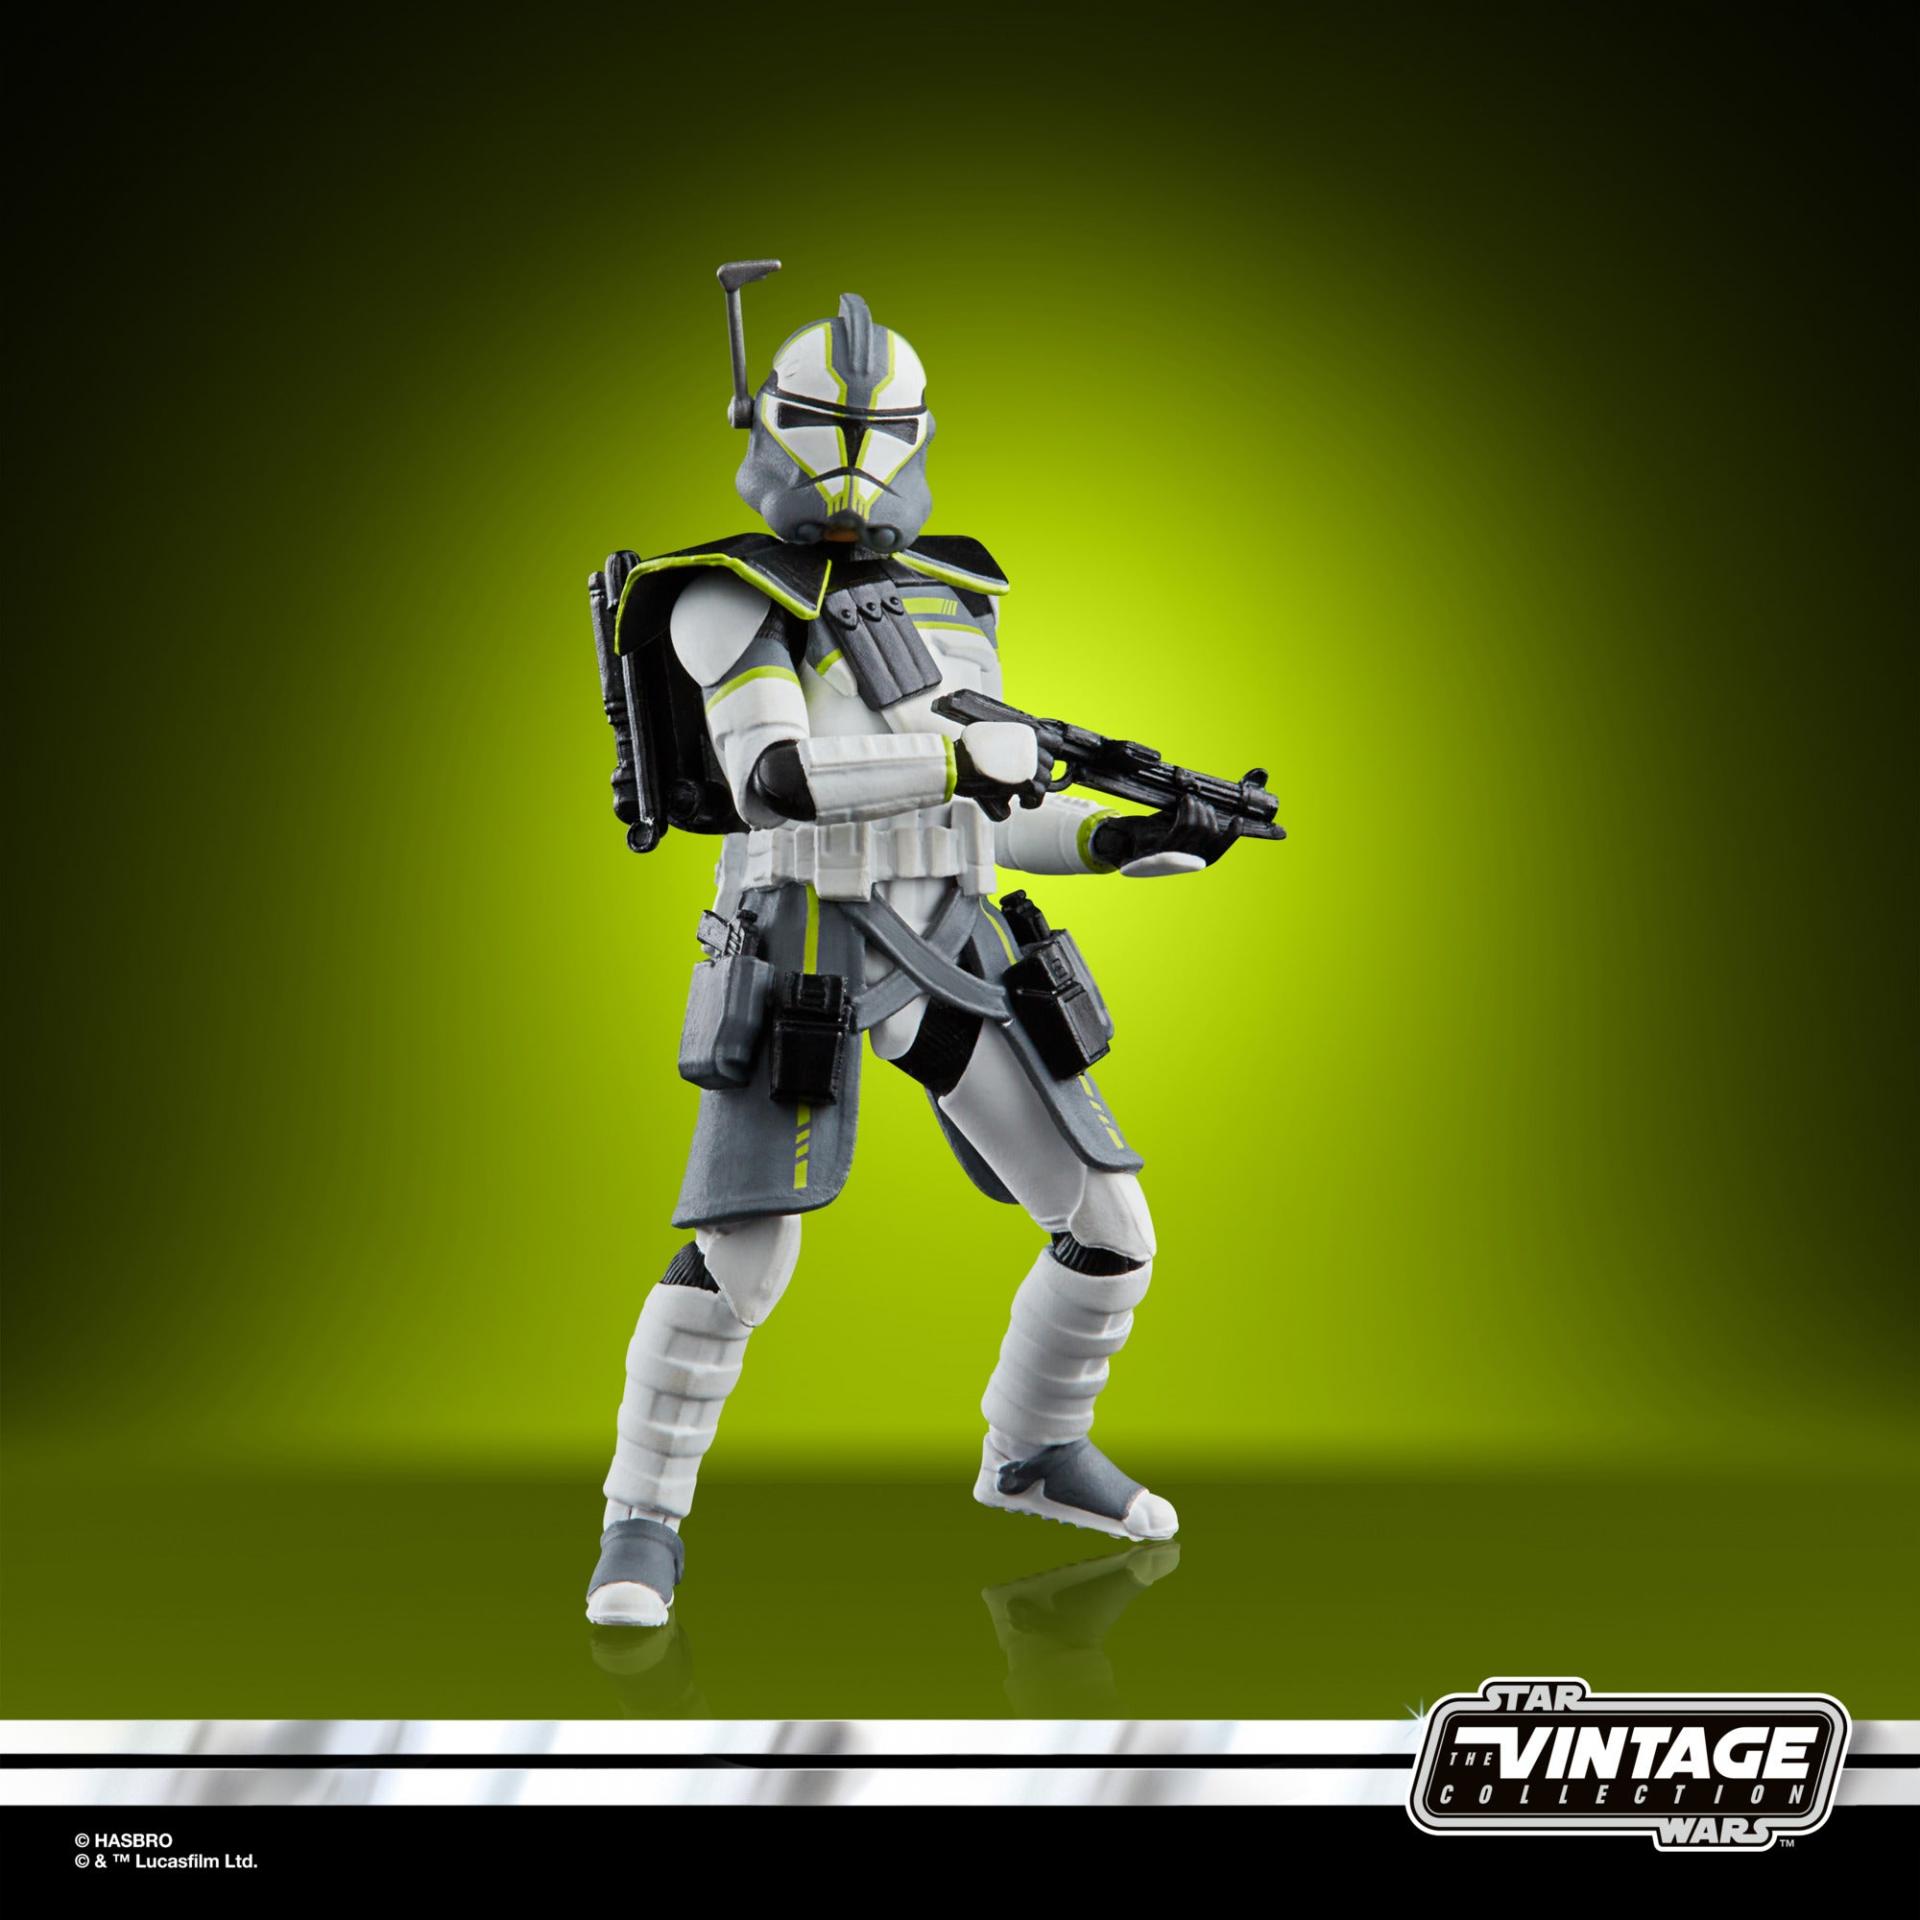 Star wars the vintage collection gaming greats arc trooper lambent seeker jawascave 6